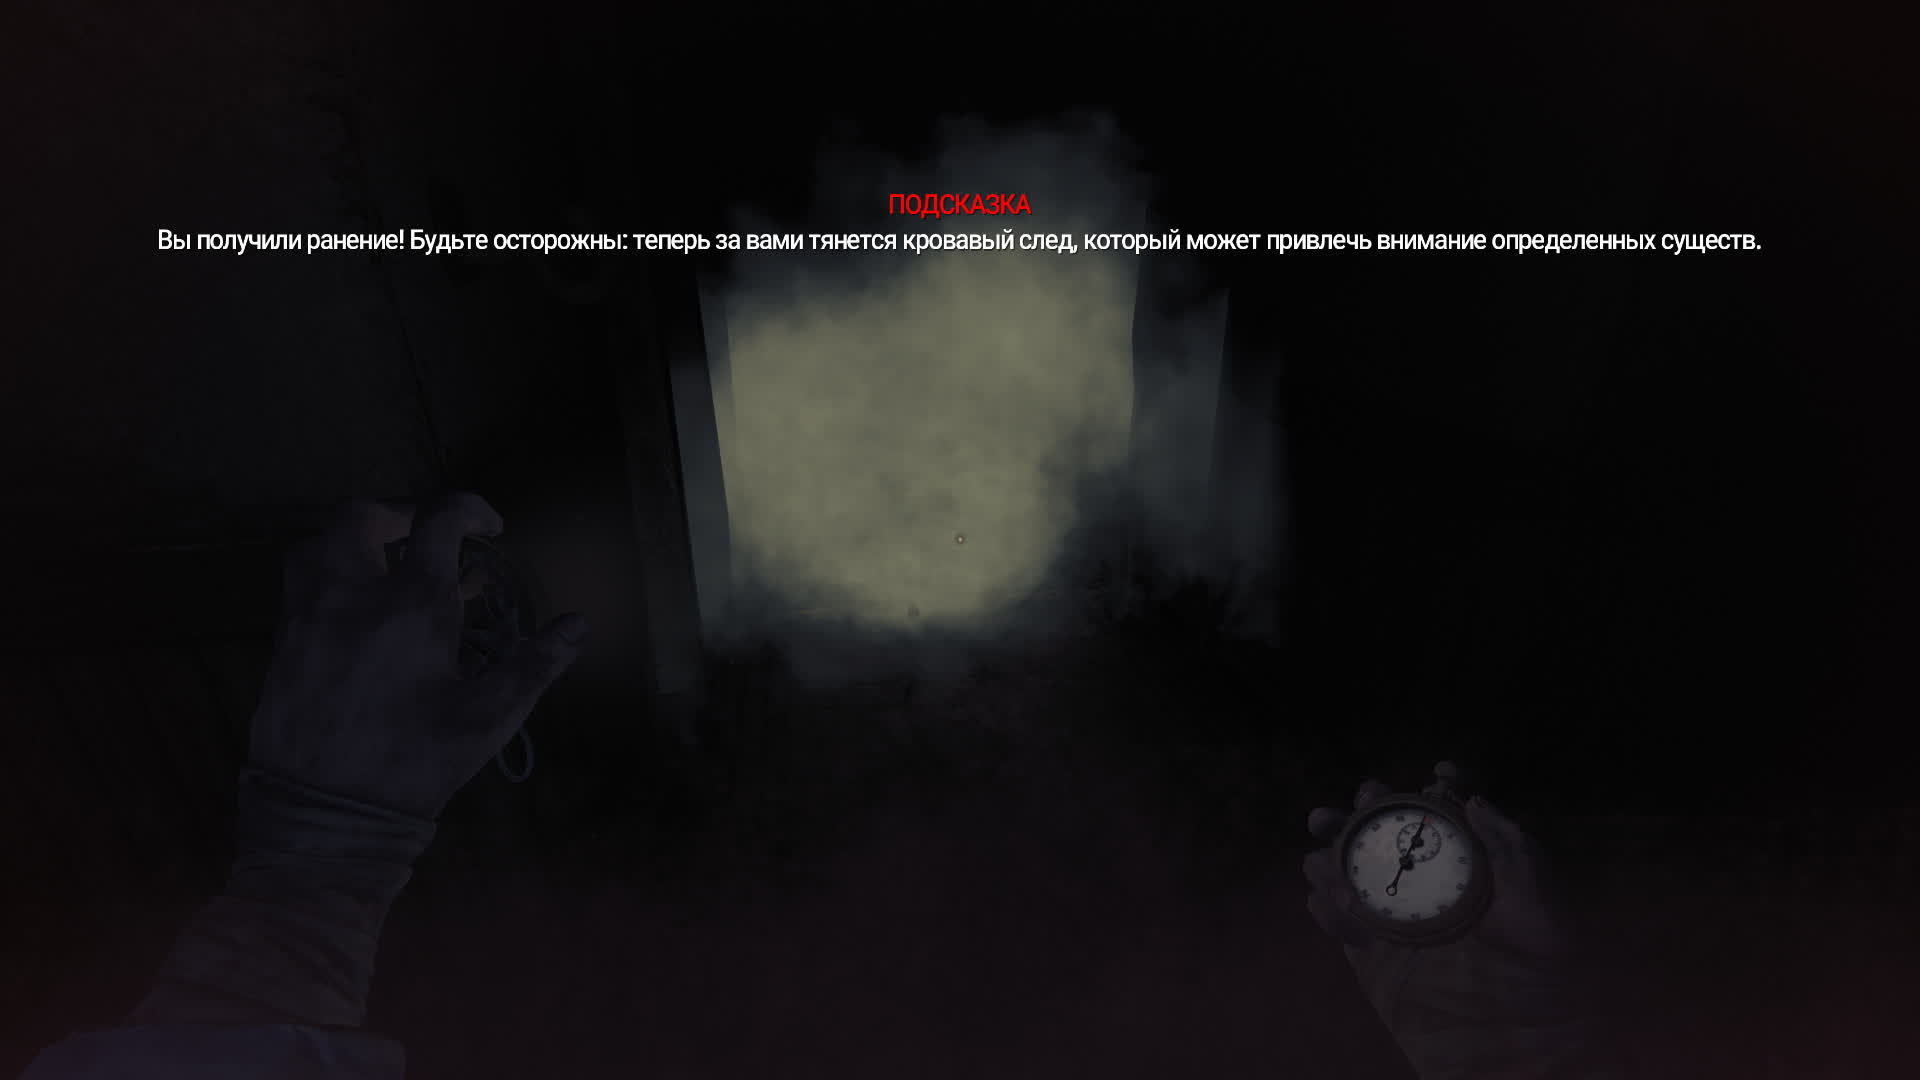 Amnesia: The Bunker review